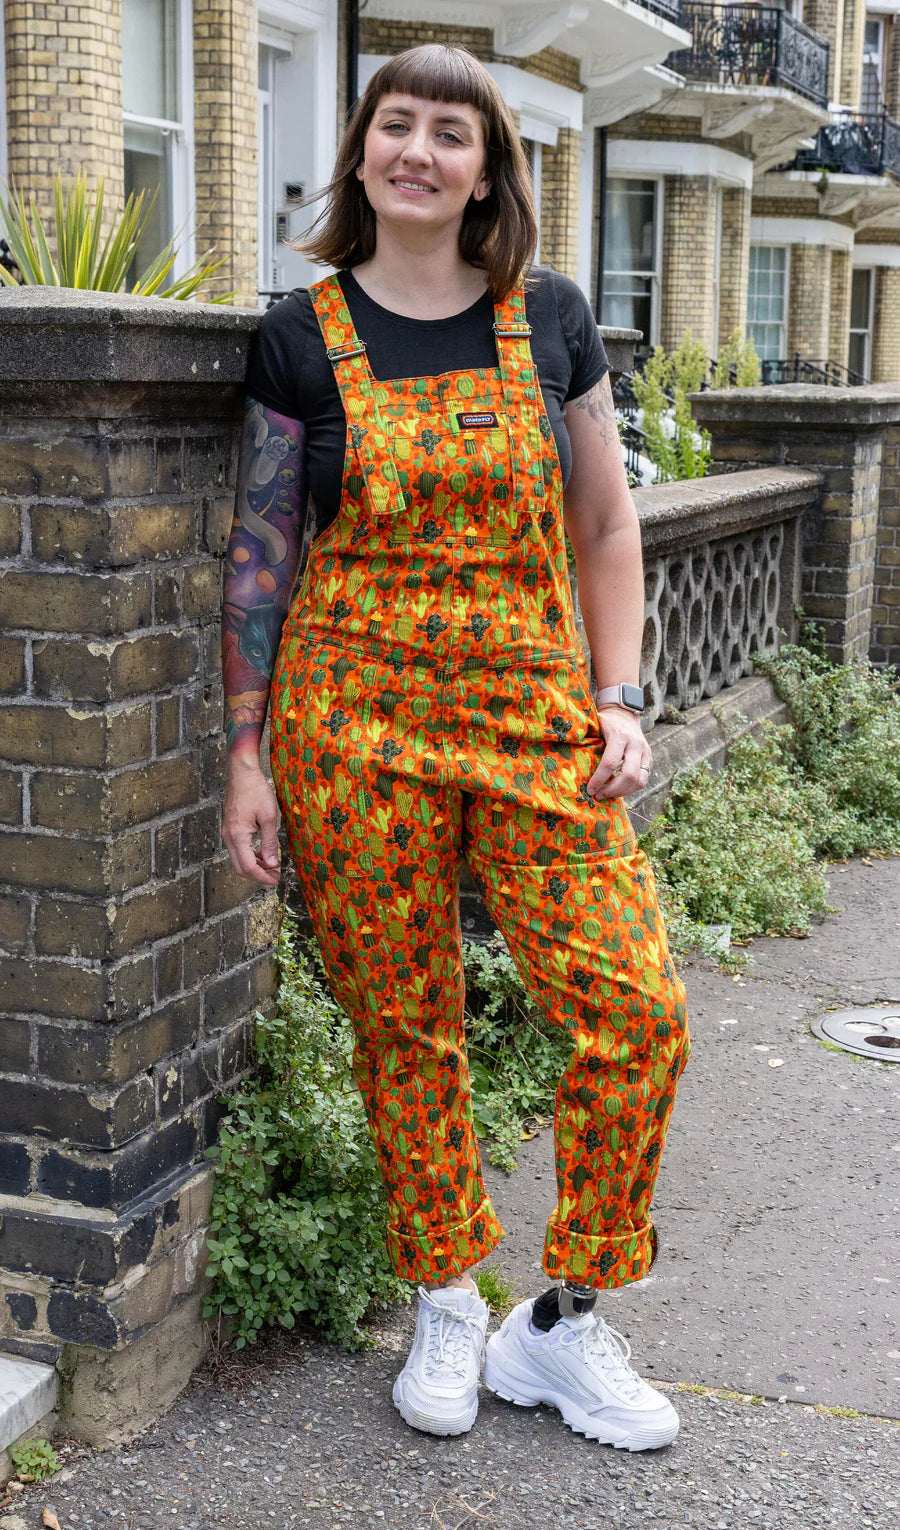 Run & Fly - Cactus Stretch Twill Dungarees